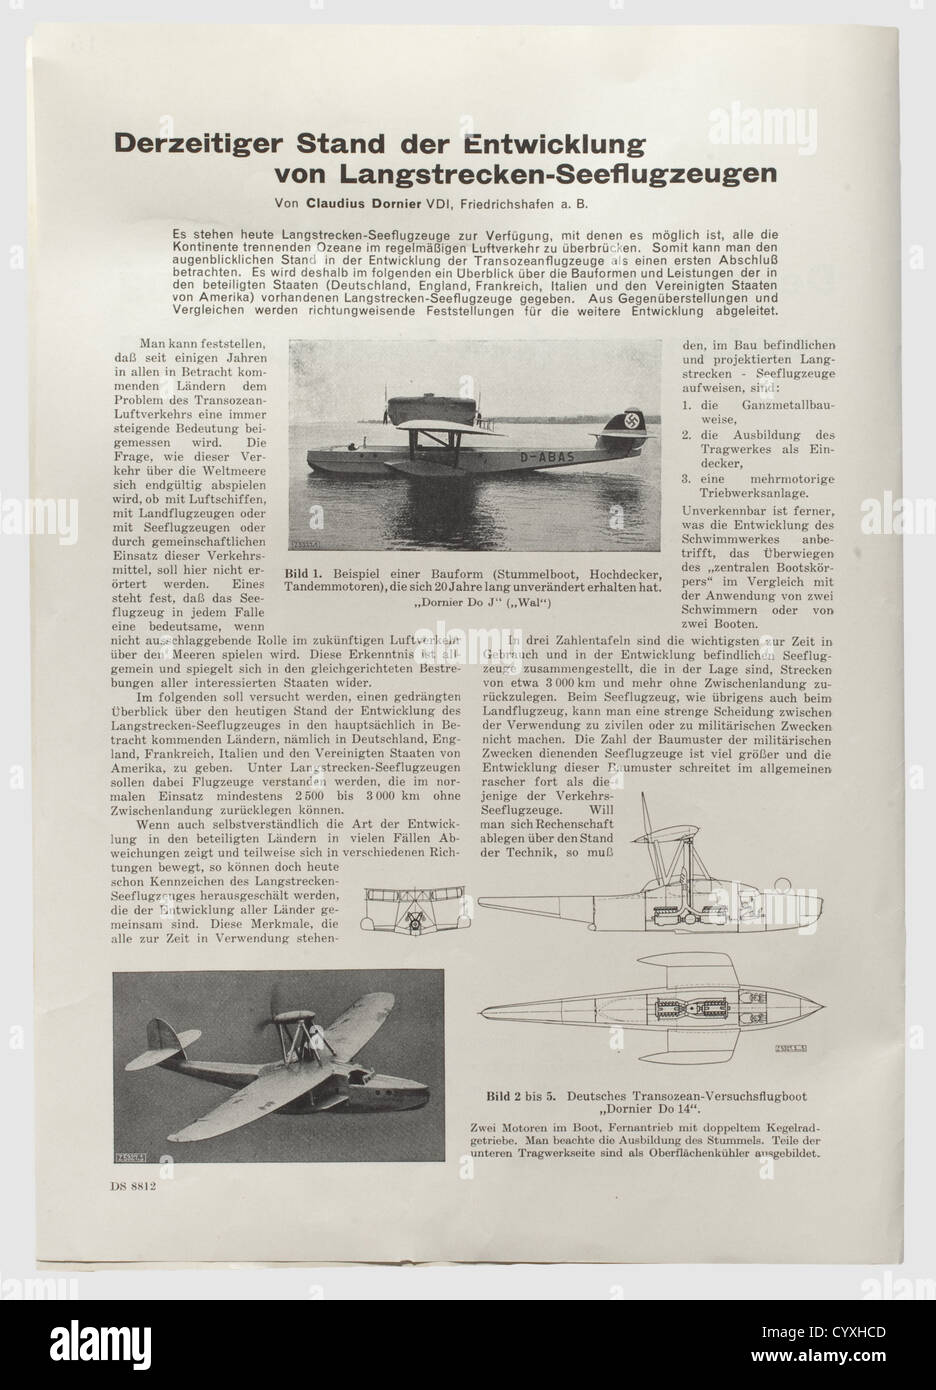 A Dornier Do 14,a rare model of transocean experimental flying boat Nickel-plated brass static 1/20th scale model of this aircraft.The 90 cm long fuselage with nose mooring hatch with hinged cover,pennant socket,celluloid glazed cabin windows,sliding cover to crew entrance hatch,the two pilot's compartment or cabin with turn seats,control columns and rudder pedals,the engineers hinged hatch lifting to reveal a step ladder to engine-room and cabin with sleeping-bunk,the two back-to-back dummy 690 HP BMW VI engines with transfer gearbox for v,Additional-Rights-Clearences-Not Available Stock Photo